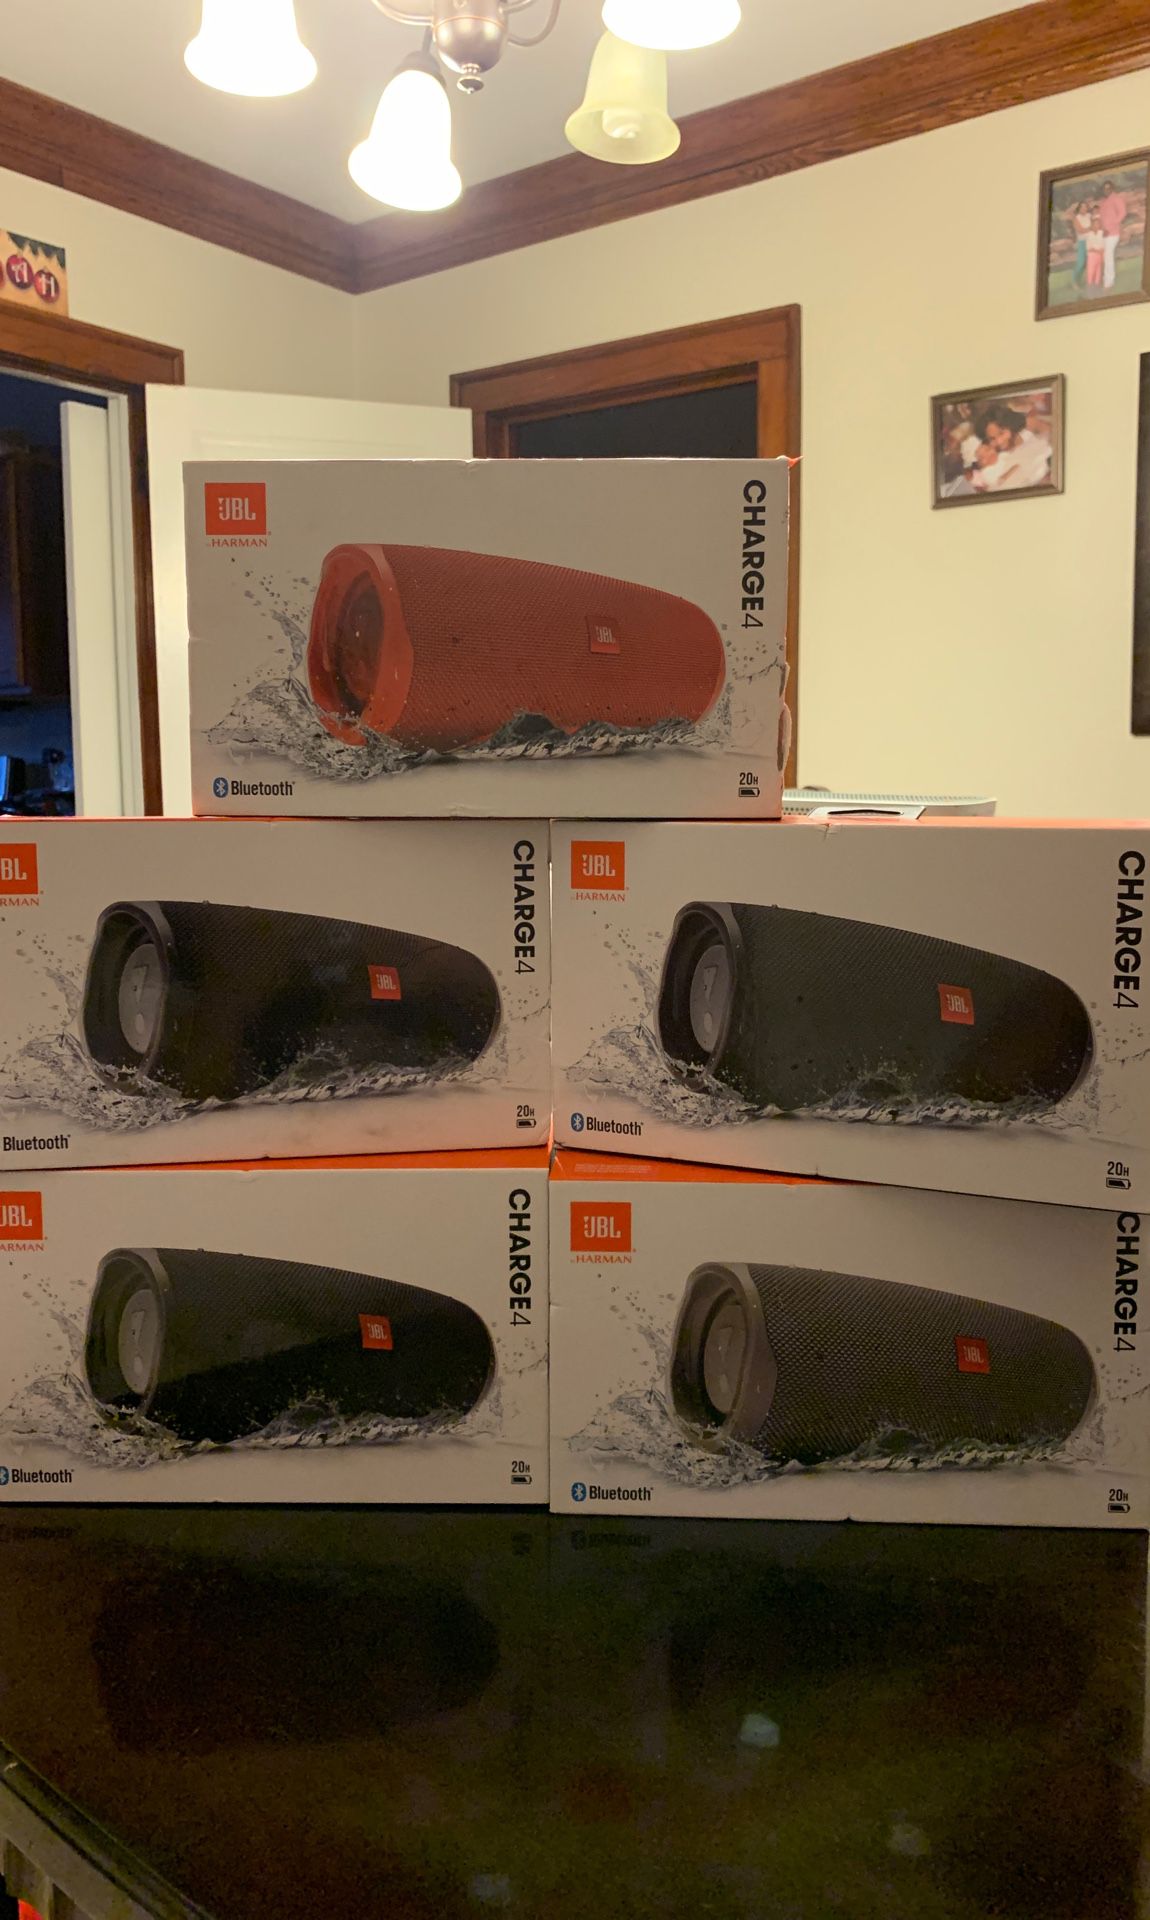 Jbl bluetooth speakers charge 4 and pulse 3